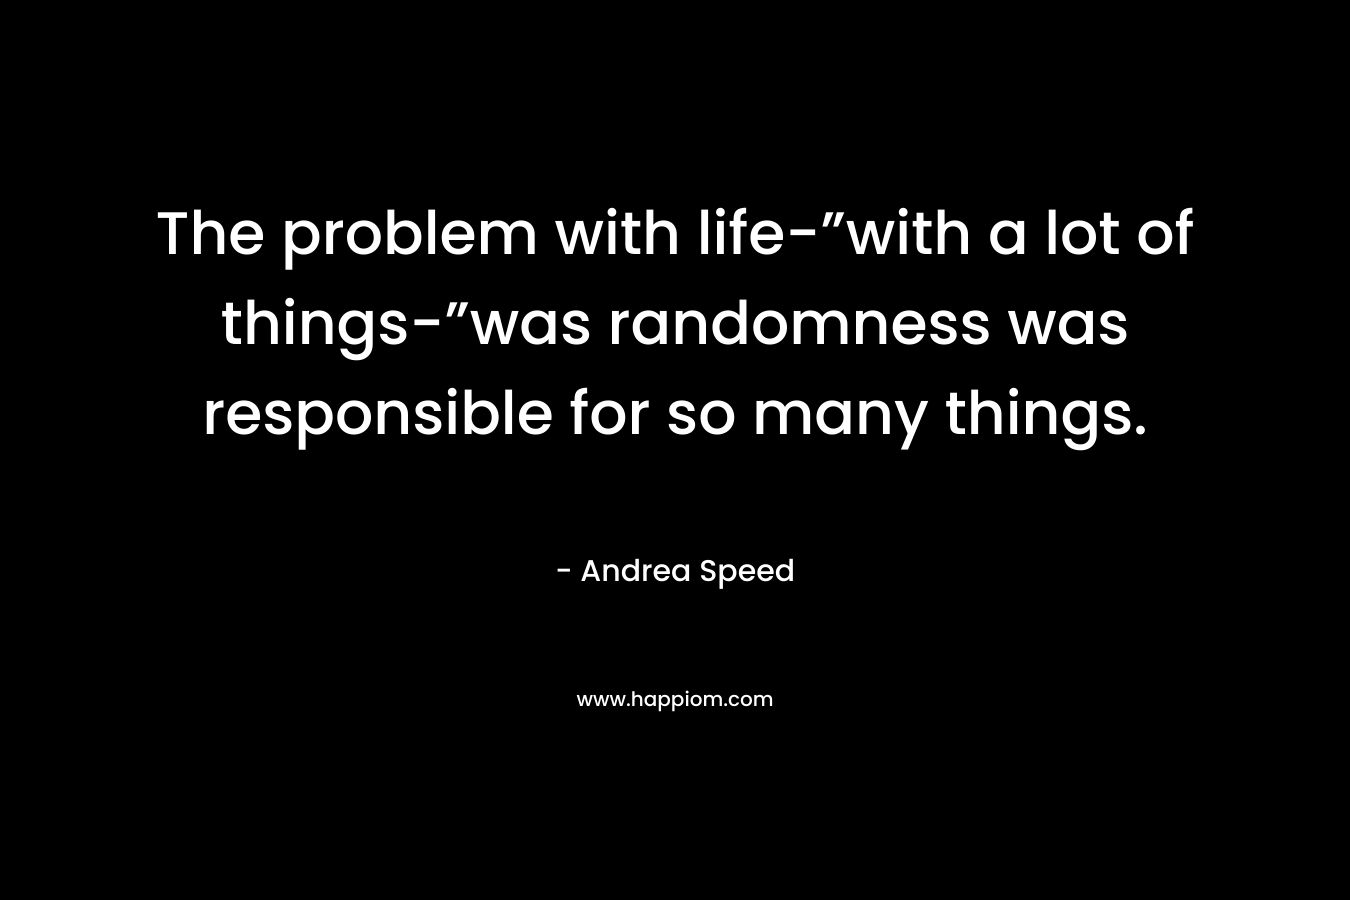 The problem with life-”with a lot of things-”was randomness was responsible for so many things.